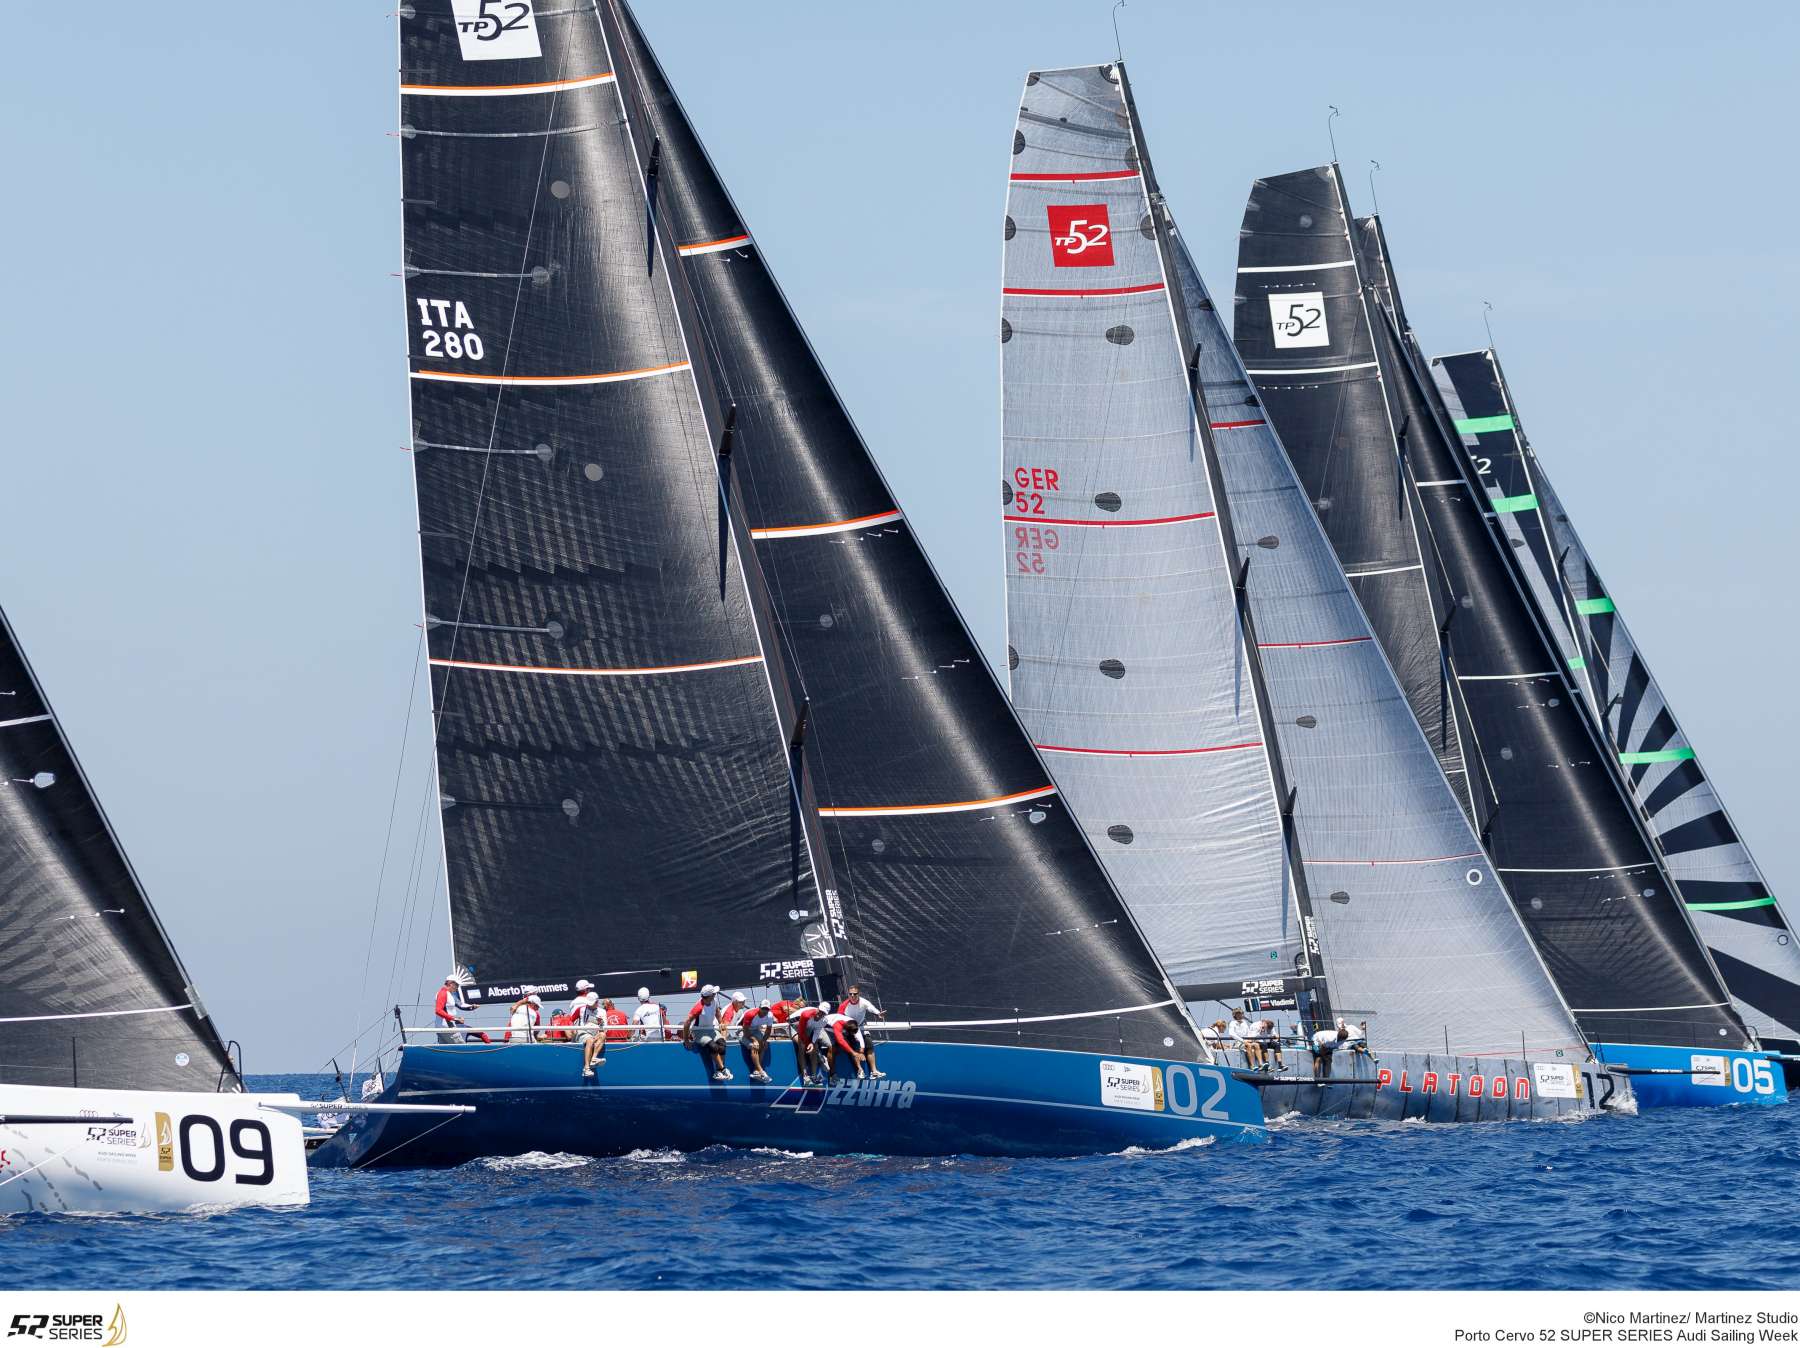 Audi Sailing Week, 52 Super Series -  Images race Day 1 online  - NEWS - Yacht Club Costa Smeralda